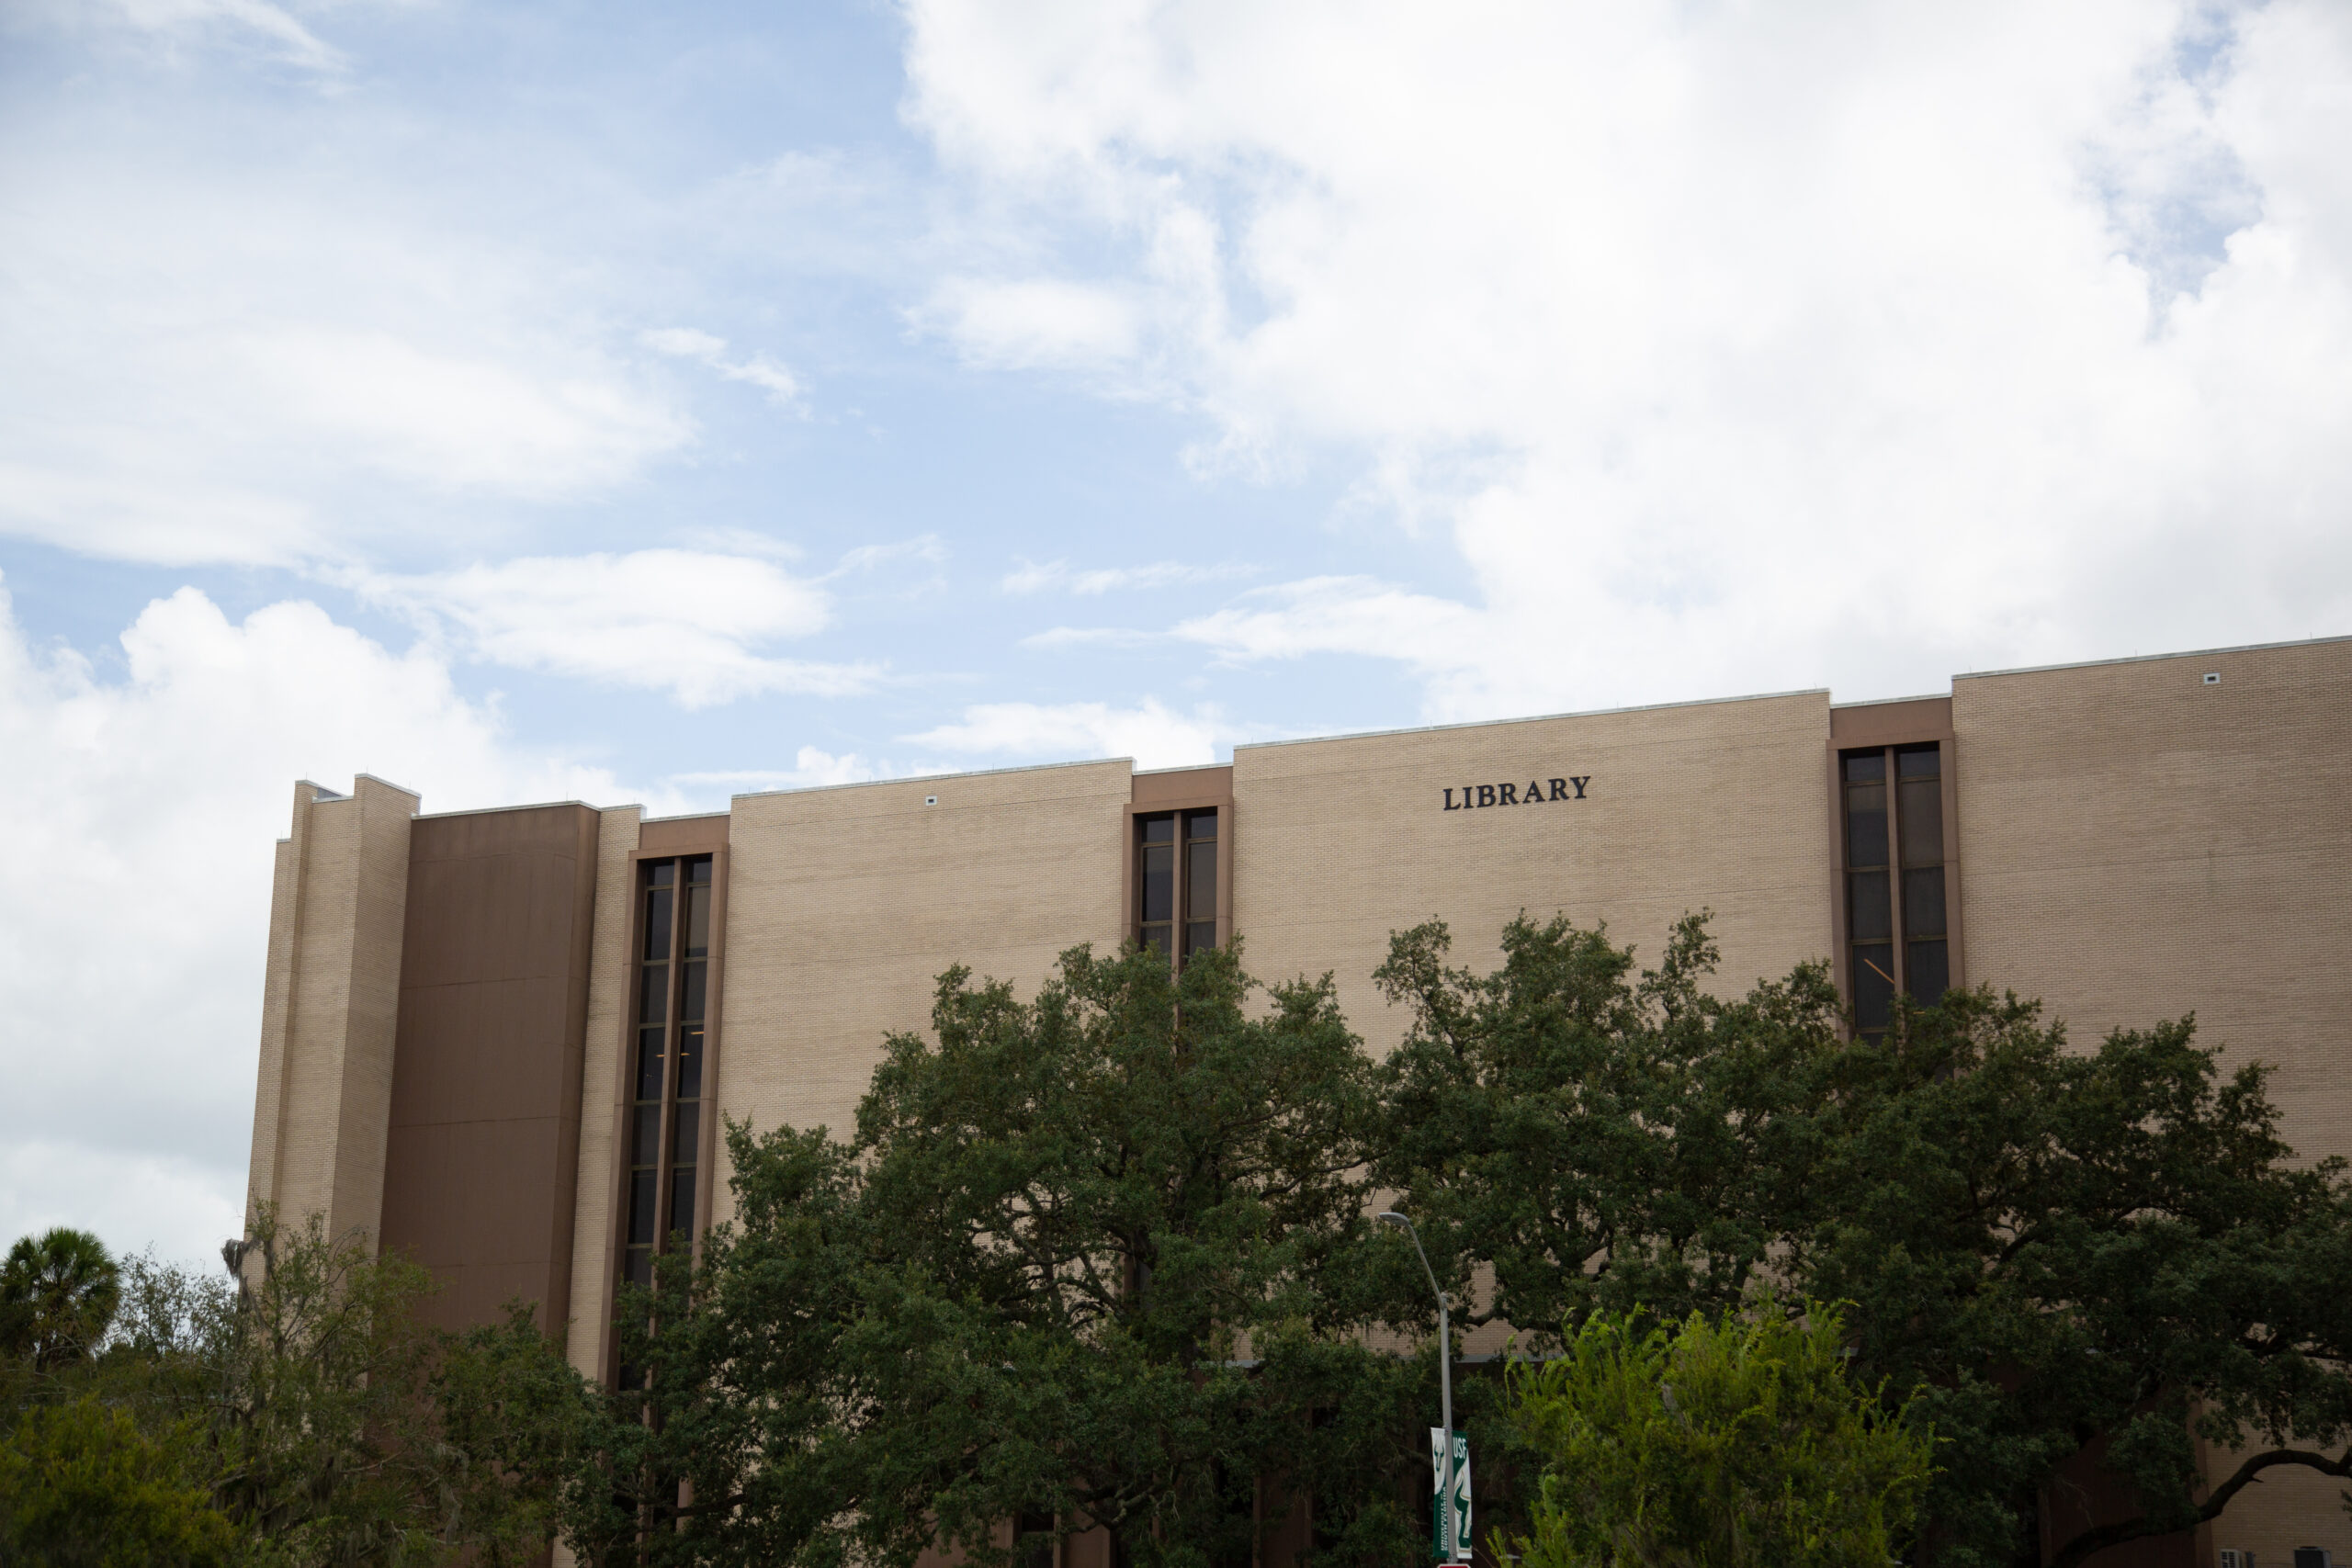 Swiping USF IDs. Increased security. The future of the Tampa campus library